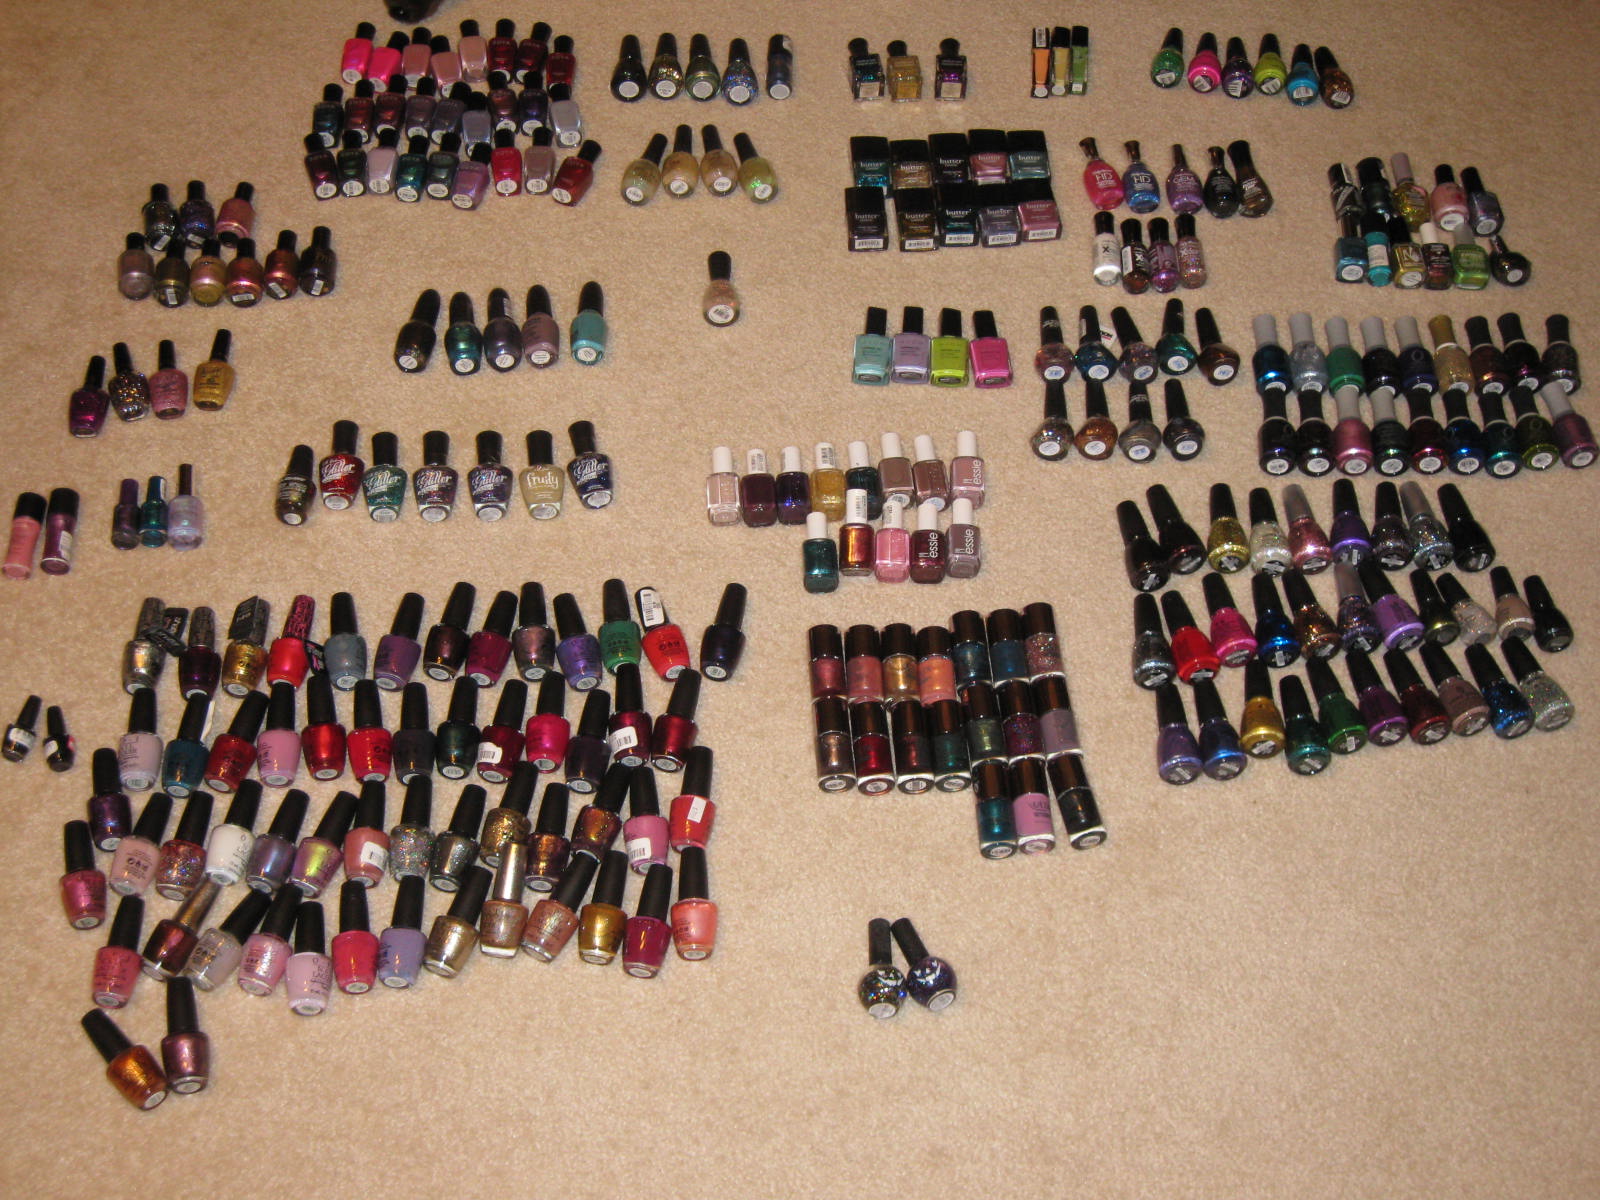 Nail Polish Rack - Nail Polish Collection. And here it is in situ: